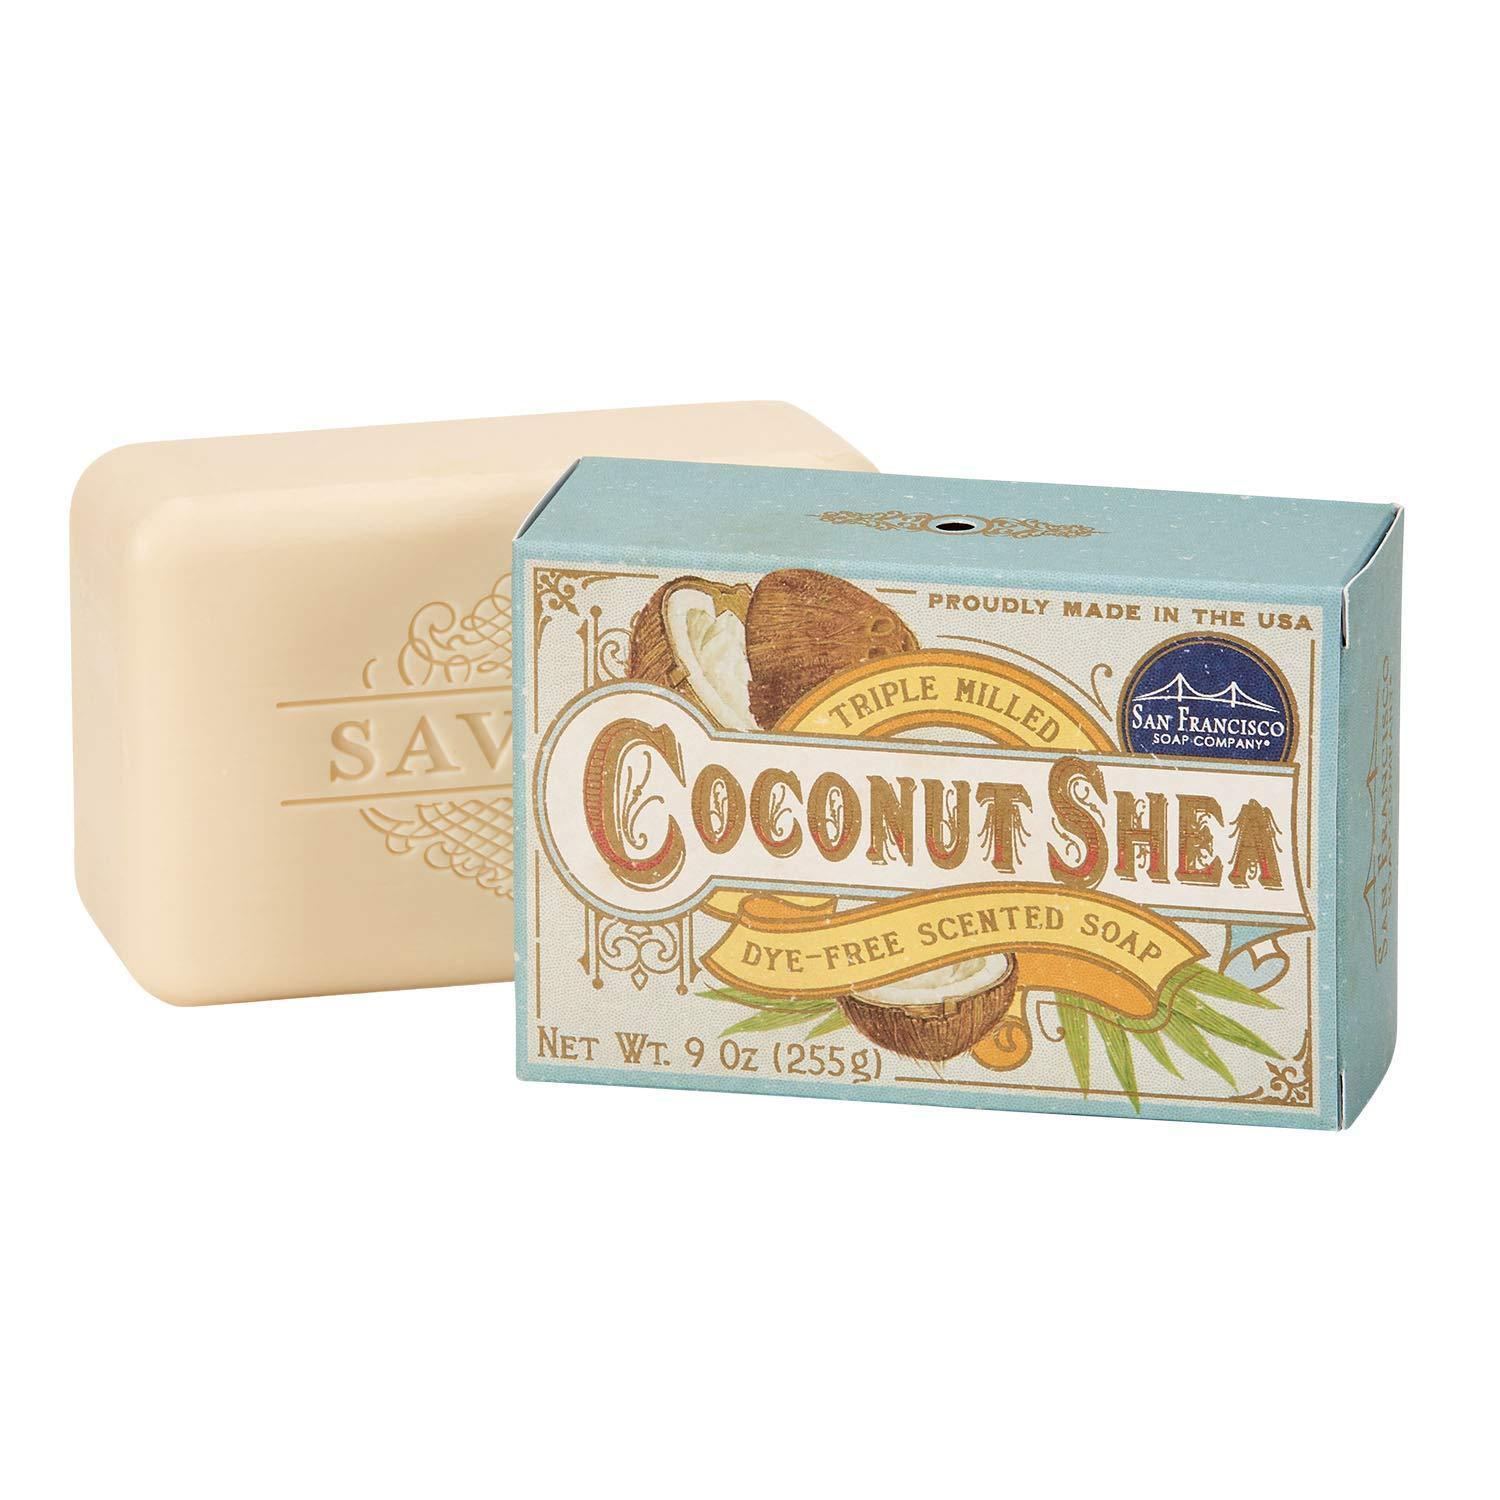 Coconut Shea Scented Triple Milled Soap Bar